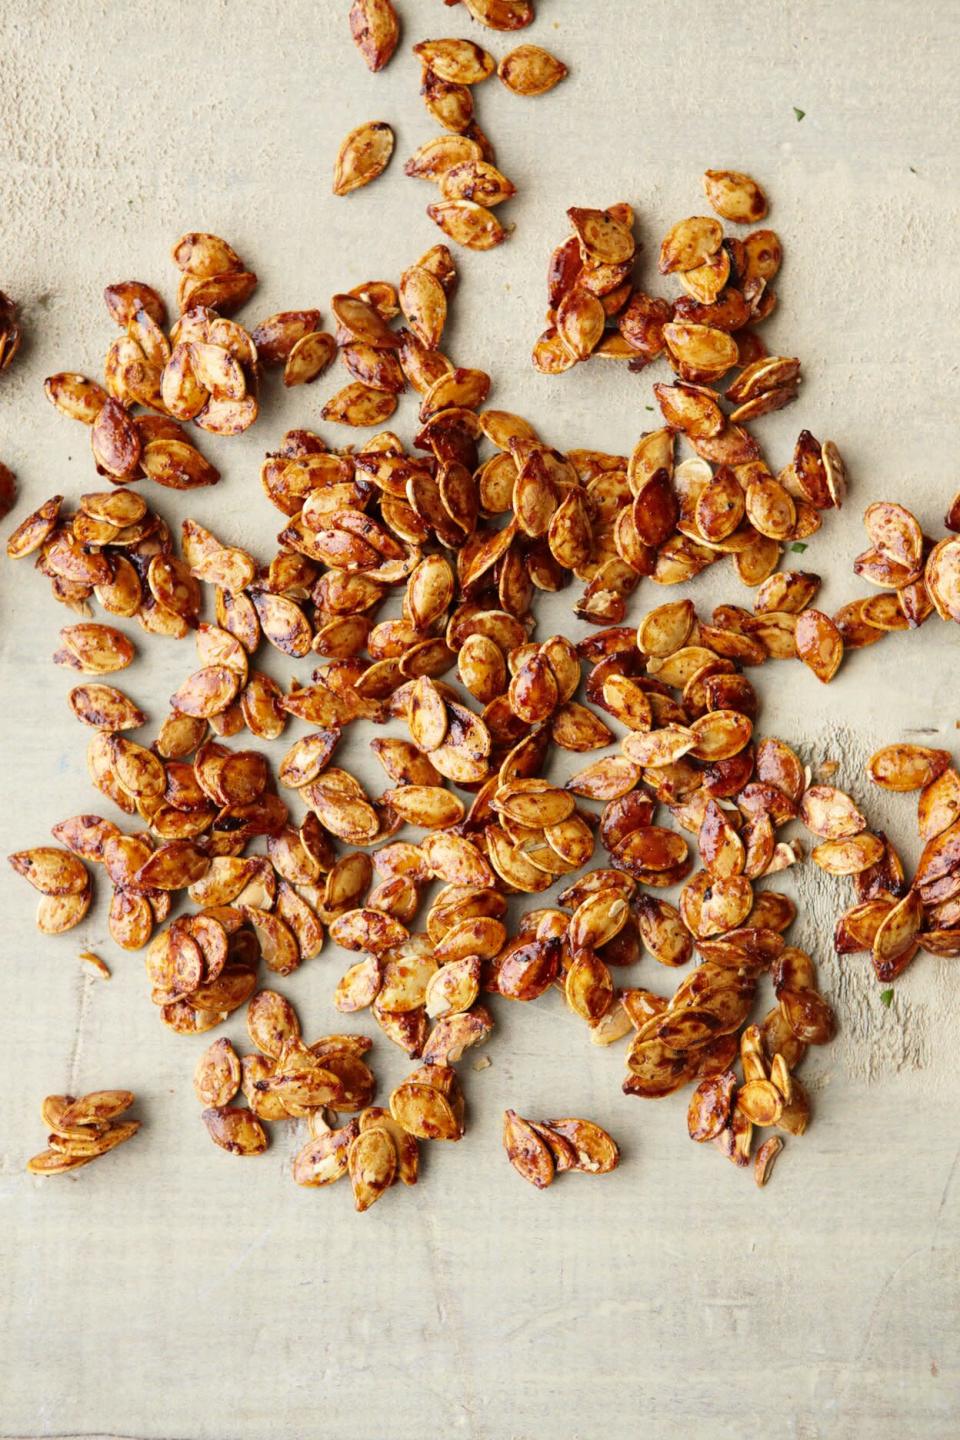 How to Make Pumpkin Seeds, the Ultimate Healthy Fall Snack